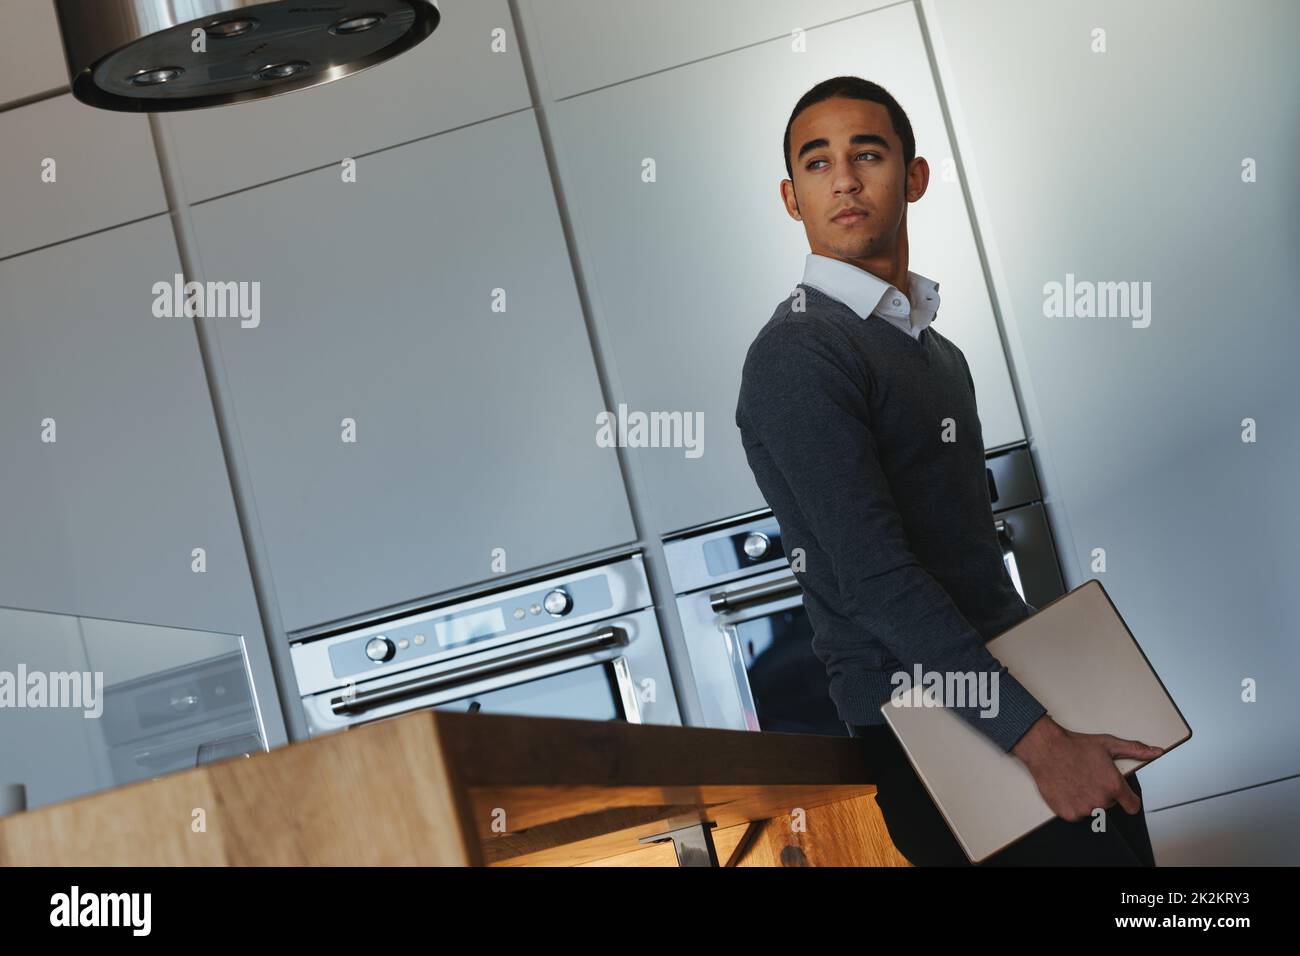 Black man standing in a modern fitted kitchen holding a laptop Stock Photo